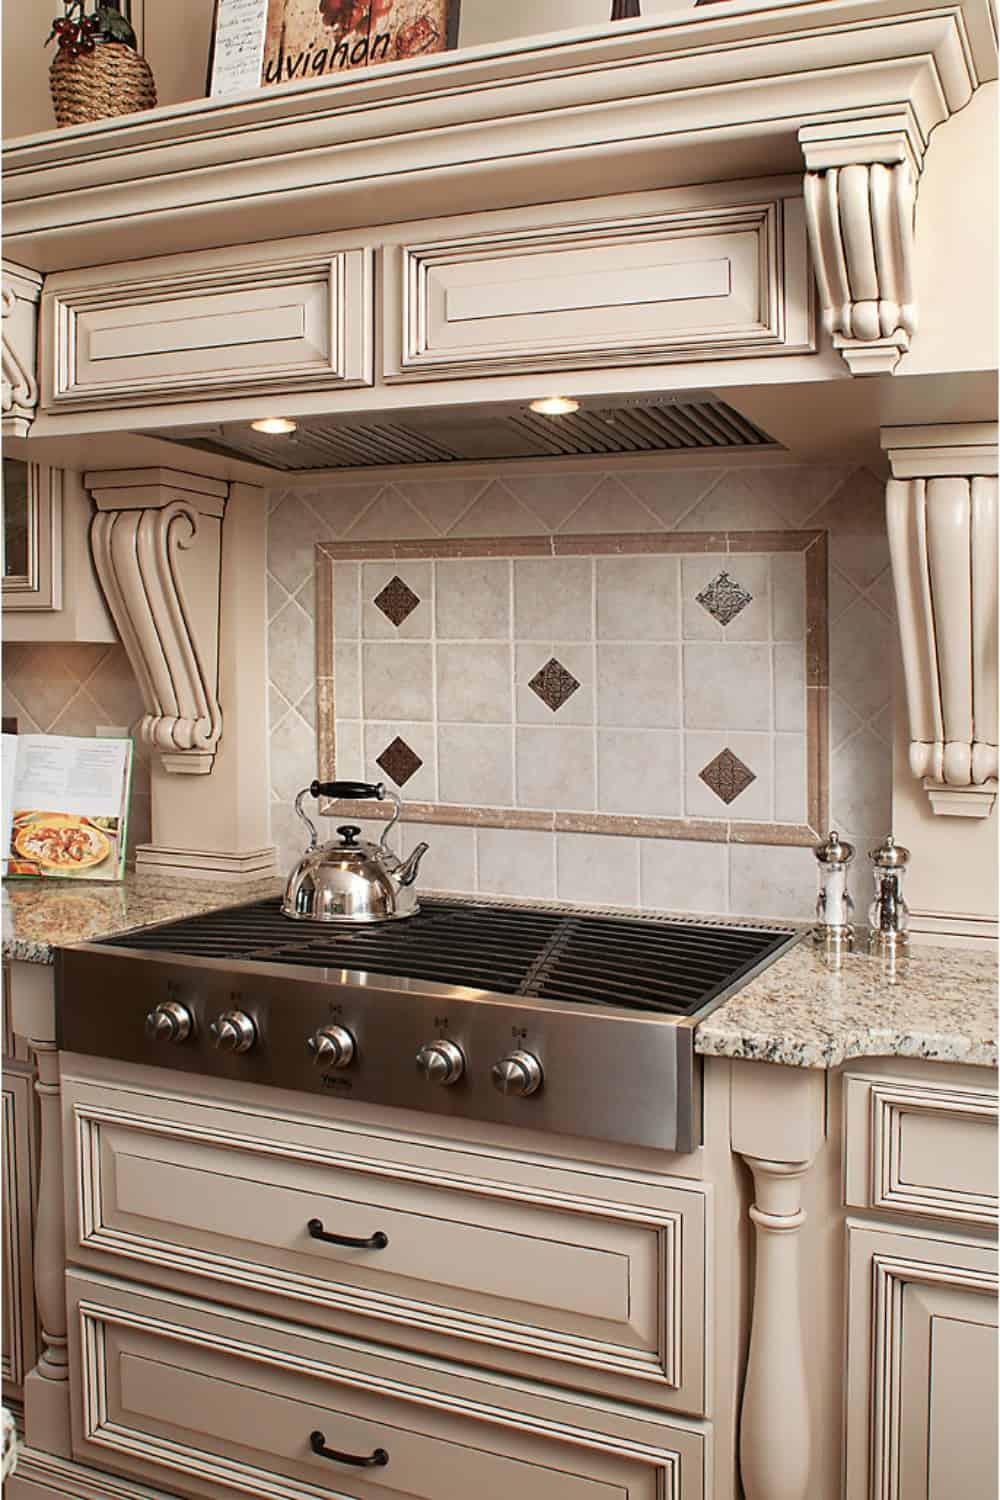 Sparks Kitchen - Victoria Renovations - Home Remodeling and Construction